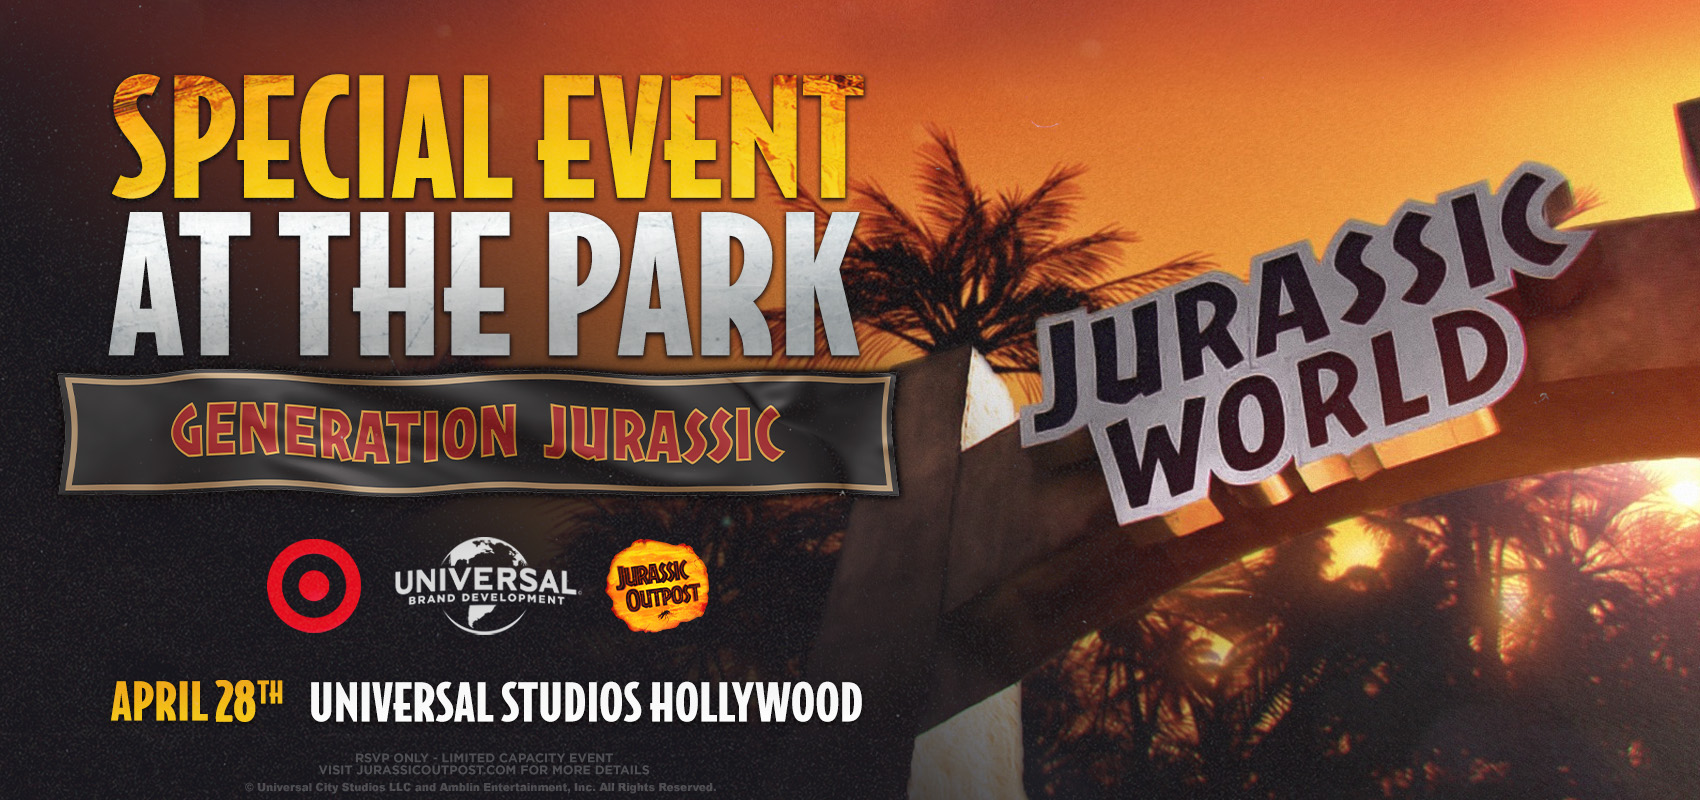 ‘Generation Jurassic’ Event Presented by Universal Brand Development and Target Coming to Universal Studios Hollywood April 28th 2022